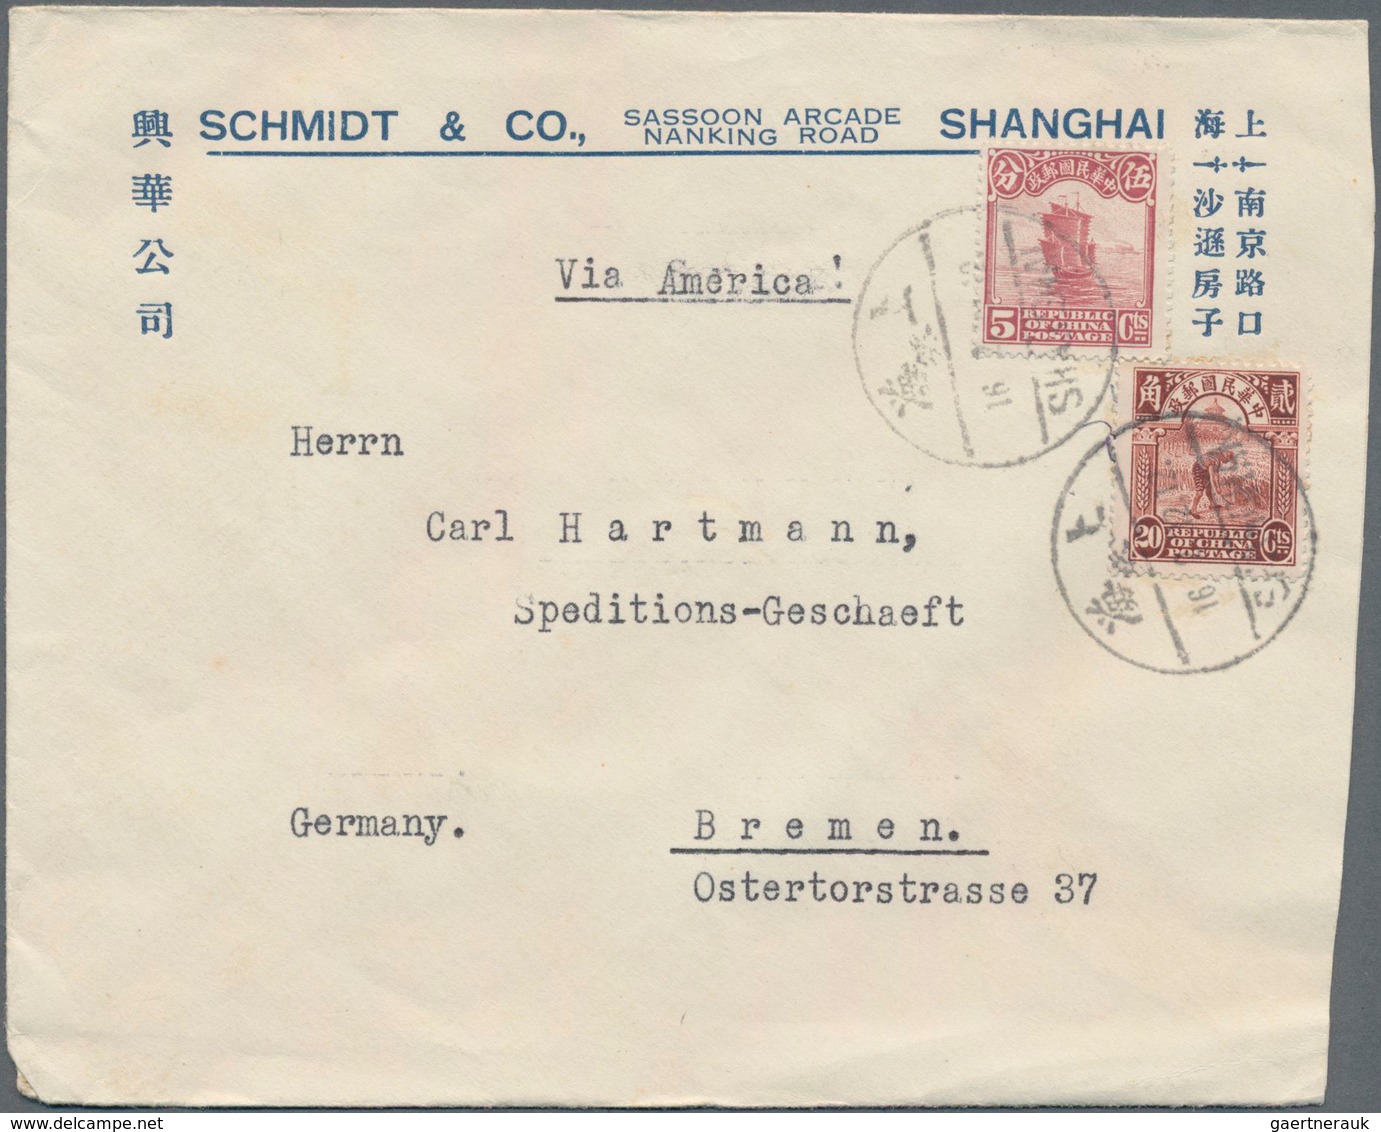 China: 1923/32, (ca.), correspondence of covers (30, inc. 17 registered) all to Germany, from Schmid